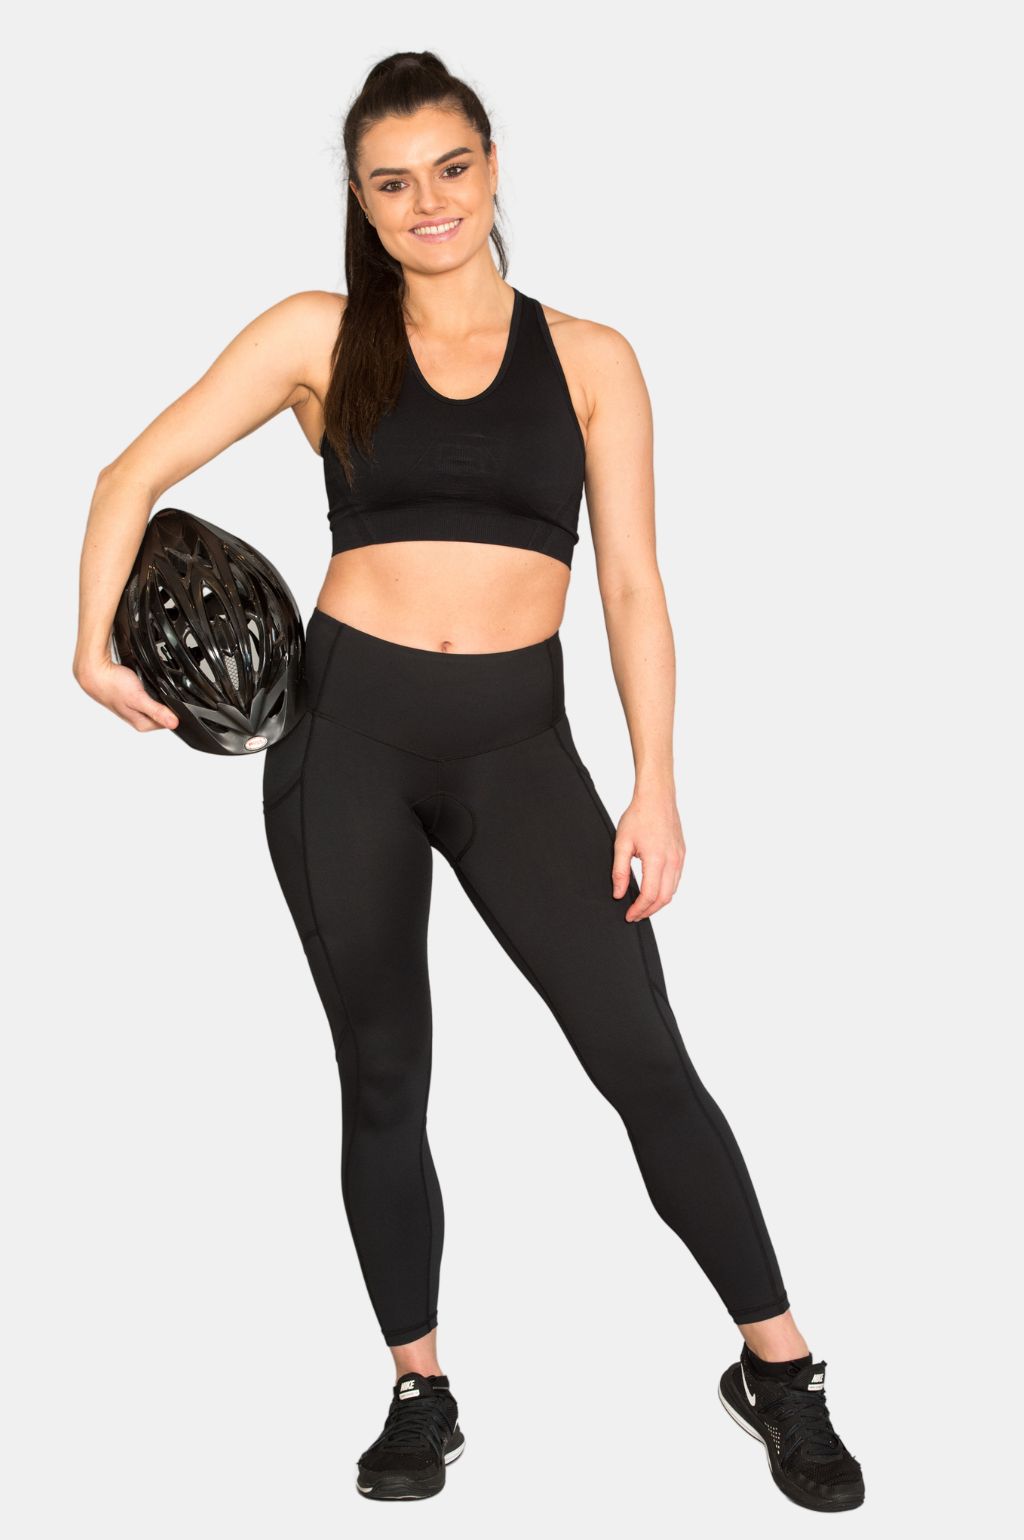 Seamless Compression Leggings V2 in Charcoal - Extra Firm